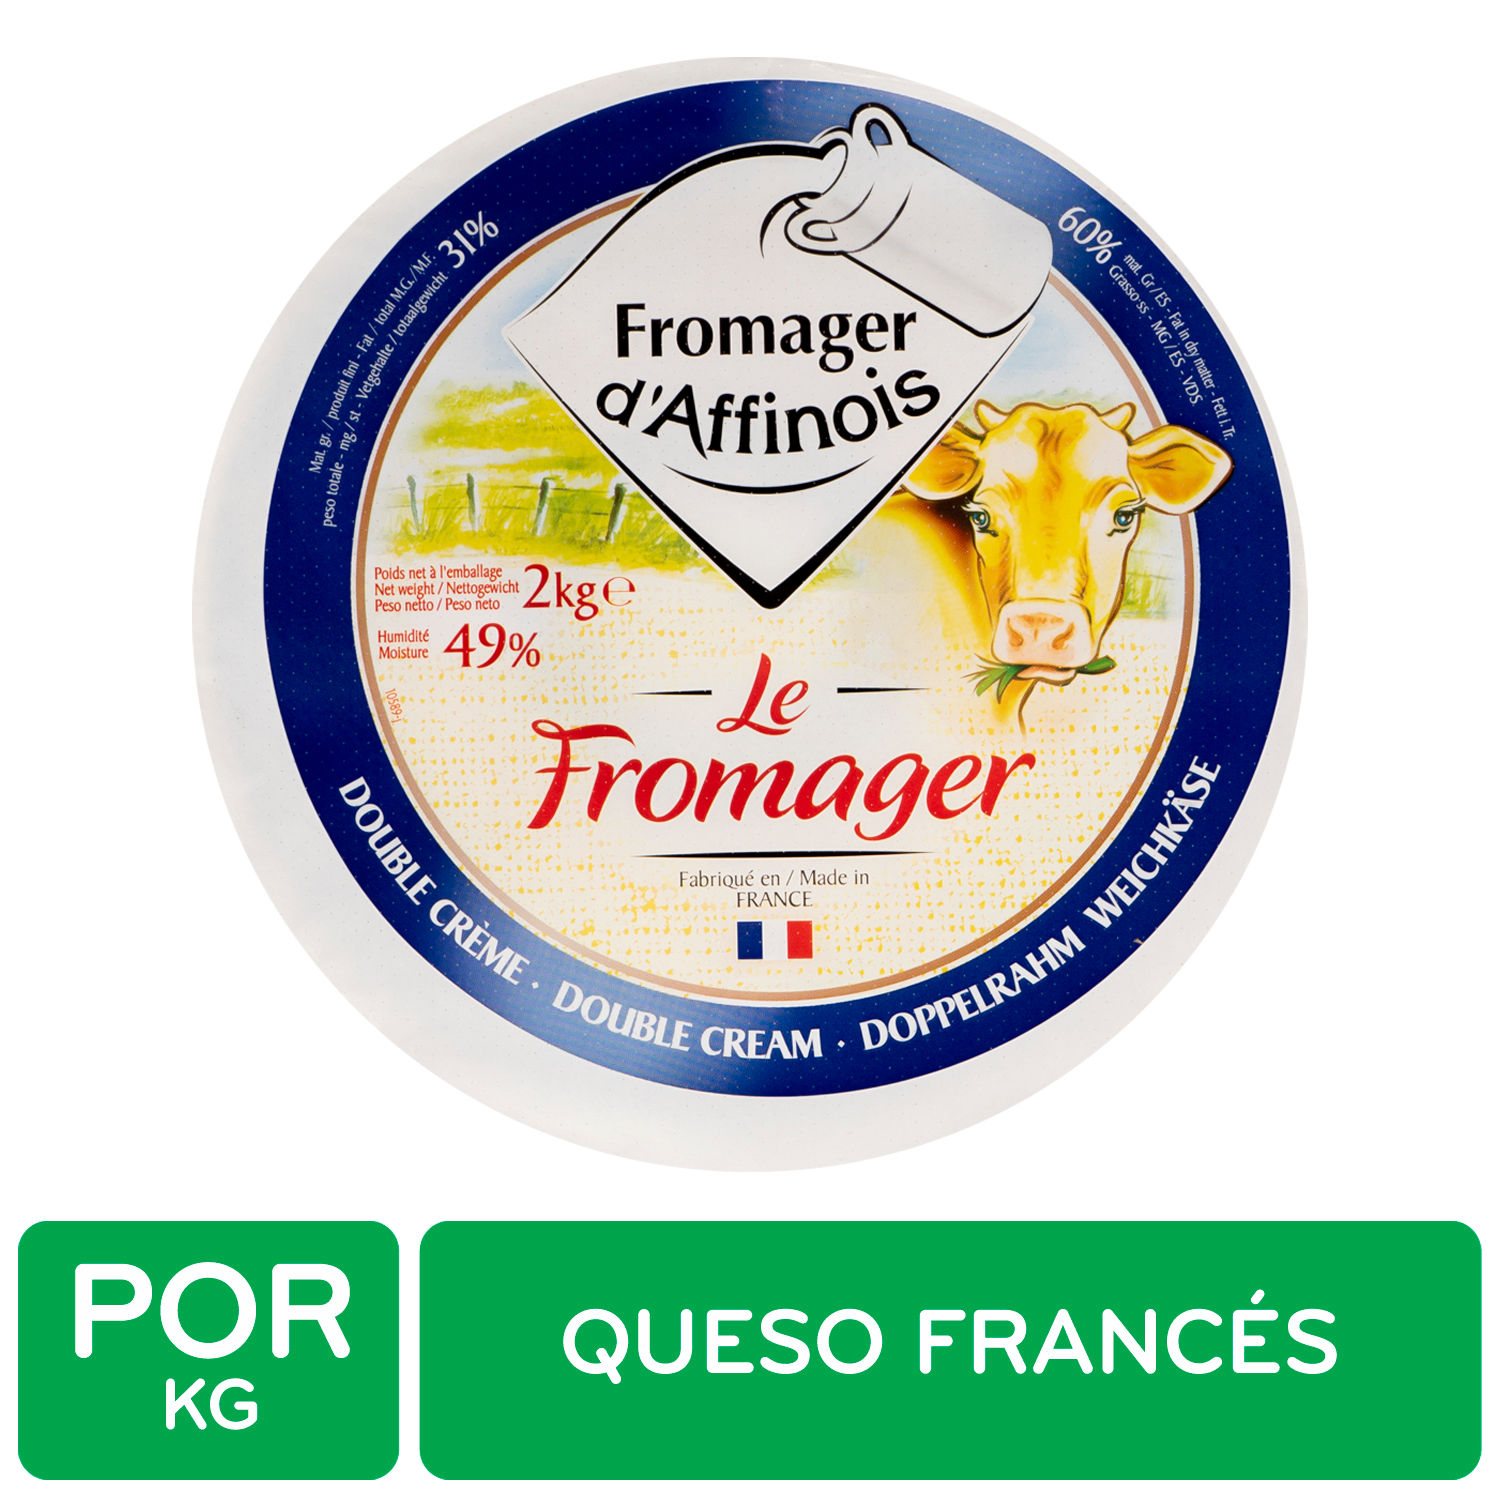 Queso Le Fromager Doble Crema Francia Fromager D’affinois